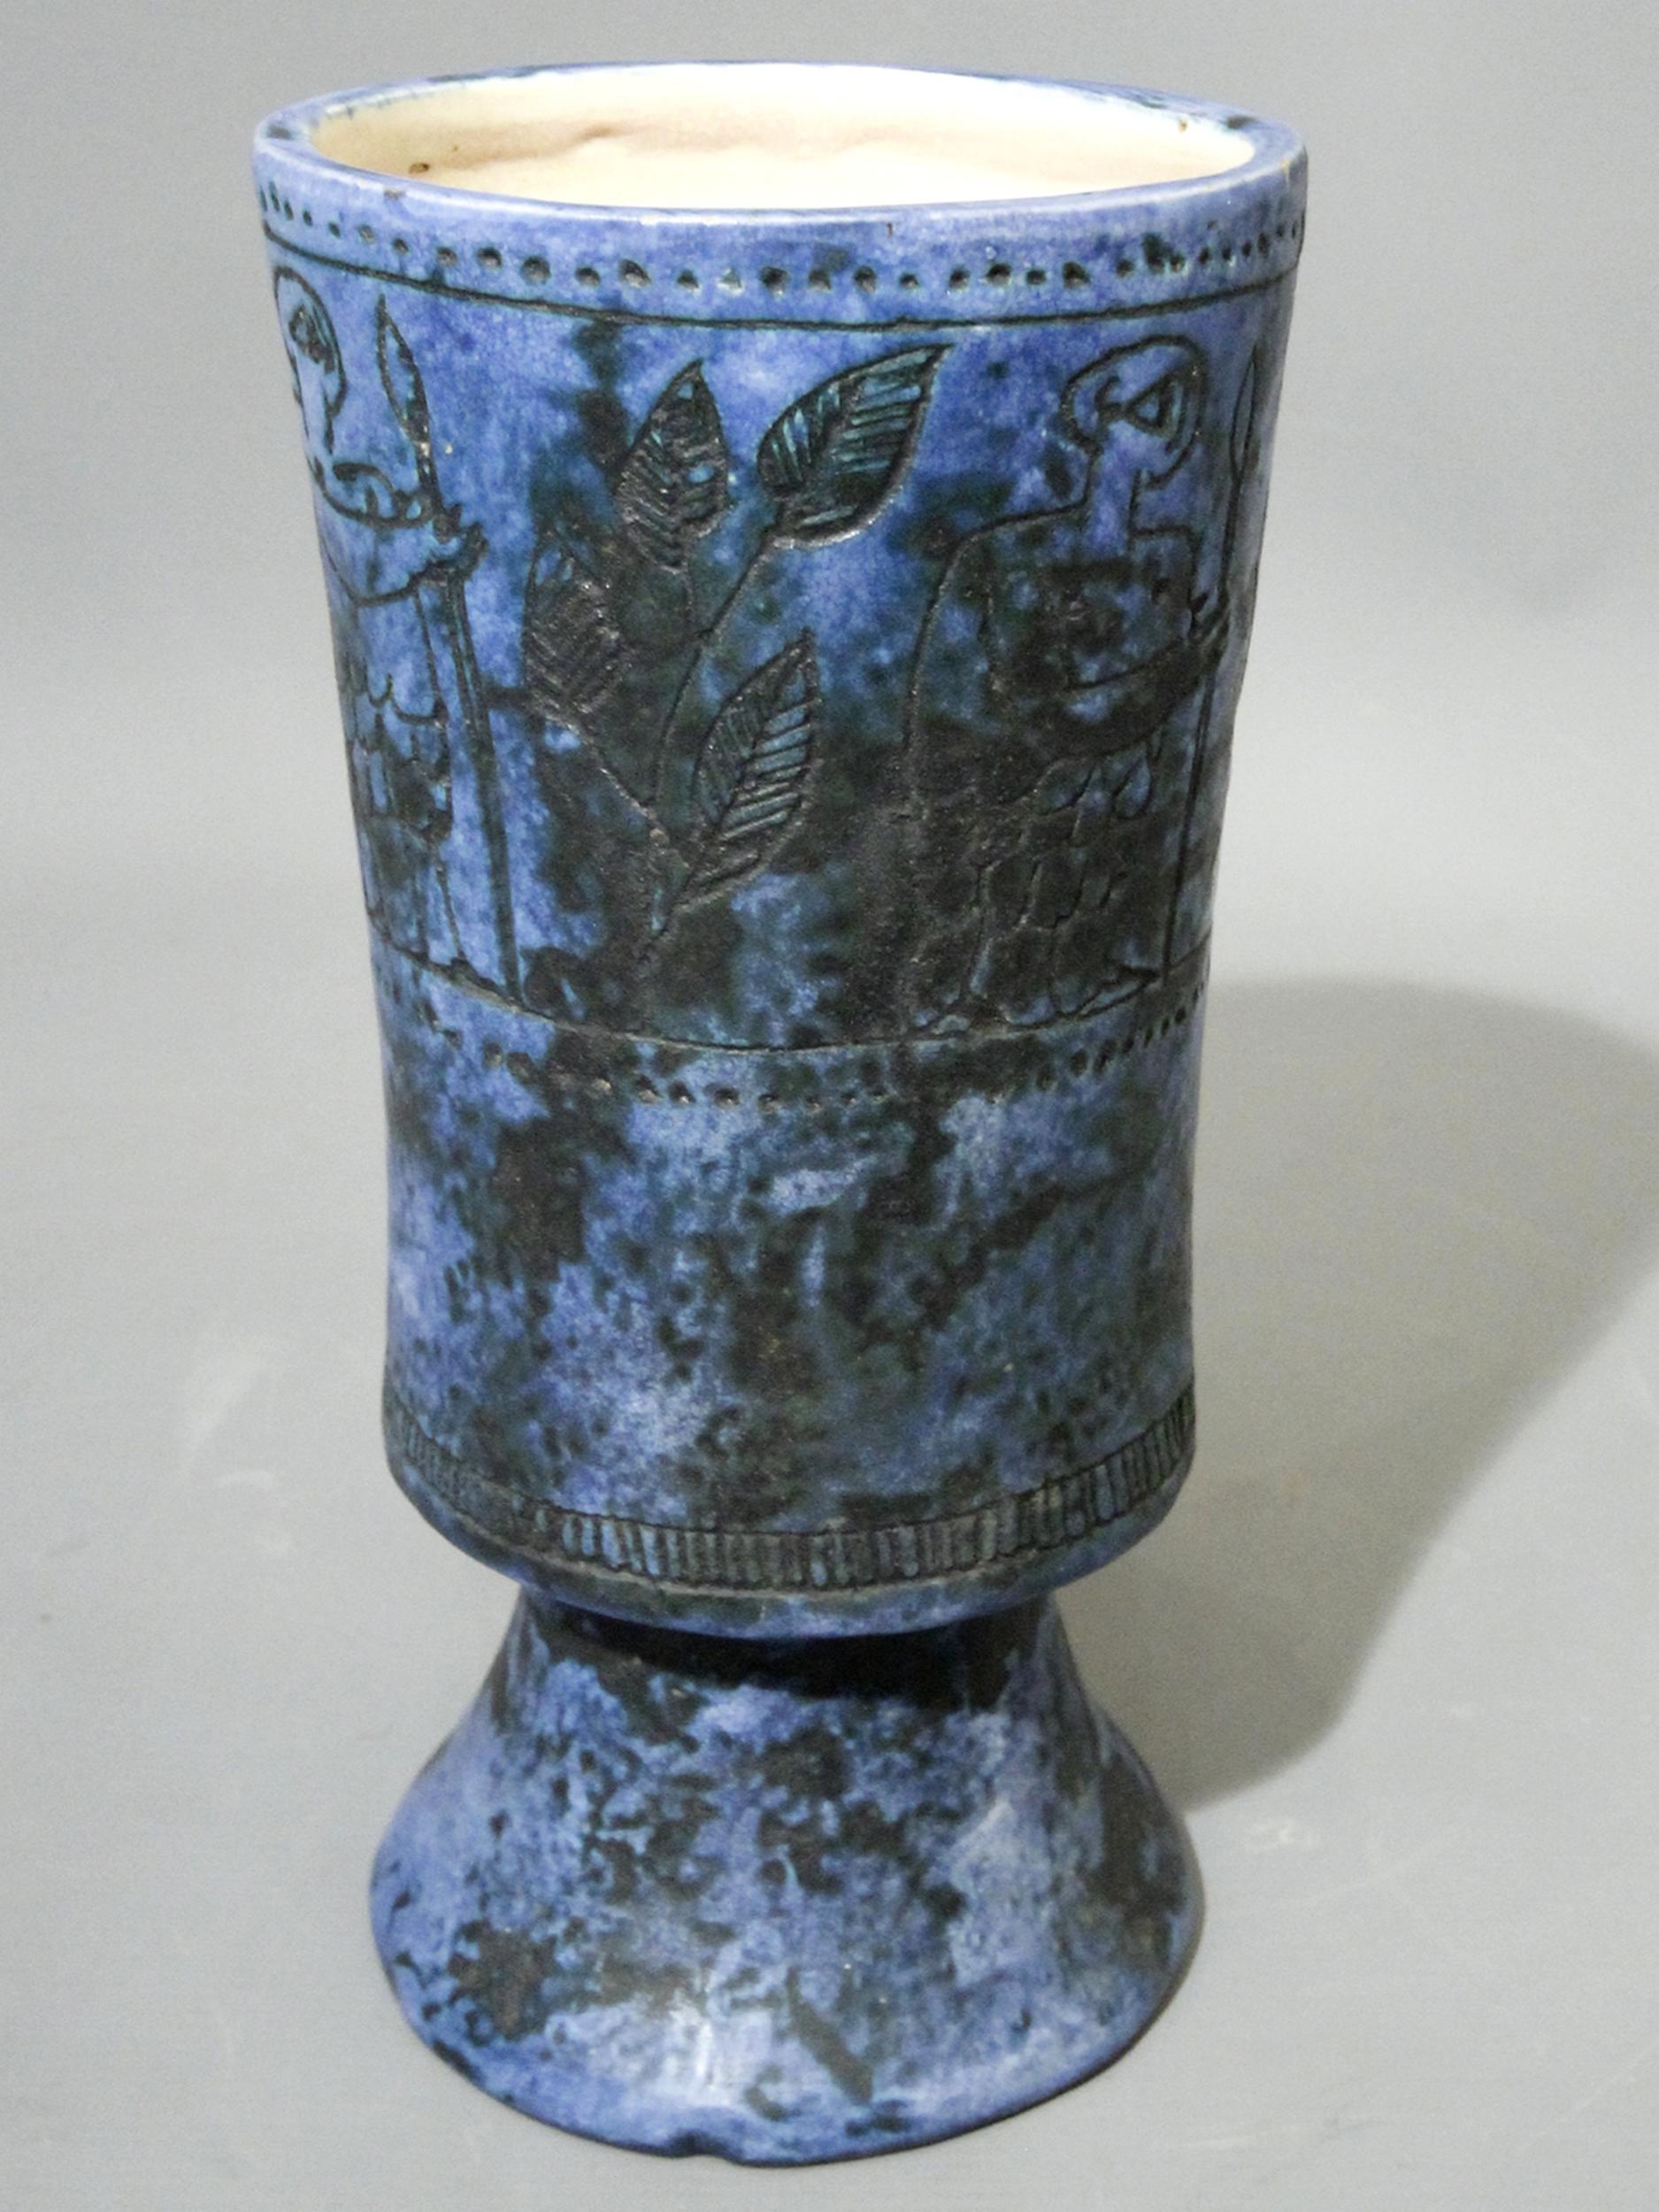 Ceramic pedestal vase with incised decoration of mythological figures and foliage on a wiped blue enamel background, black patina by Jacques Blin, Paris, France, circa 1950. Incised signature « J Blin ».
Jacques Blin (1920-1995) was born in